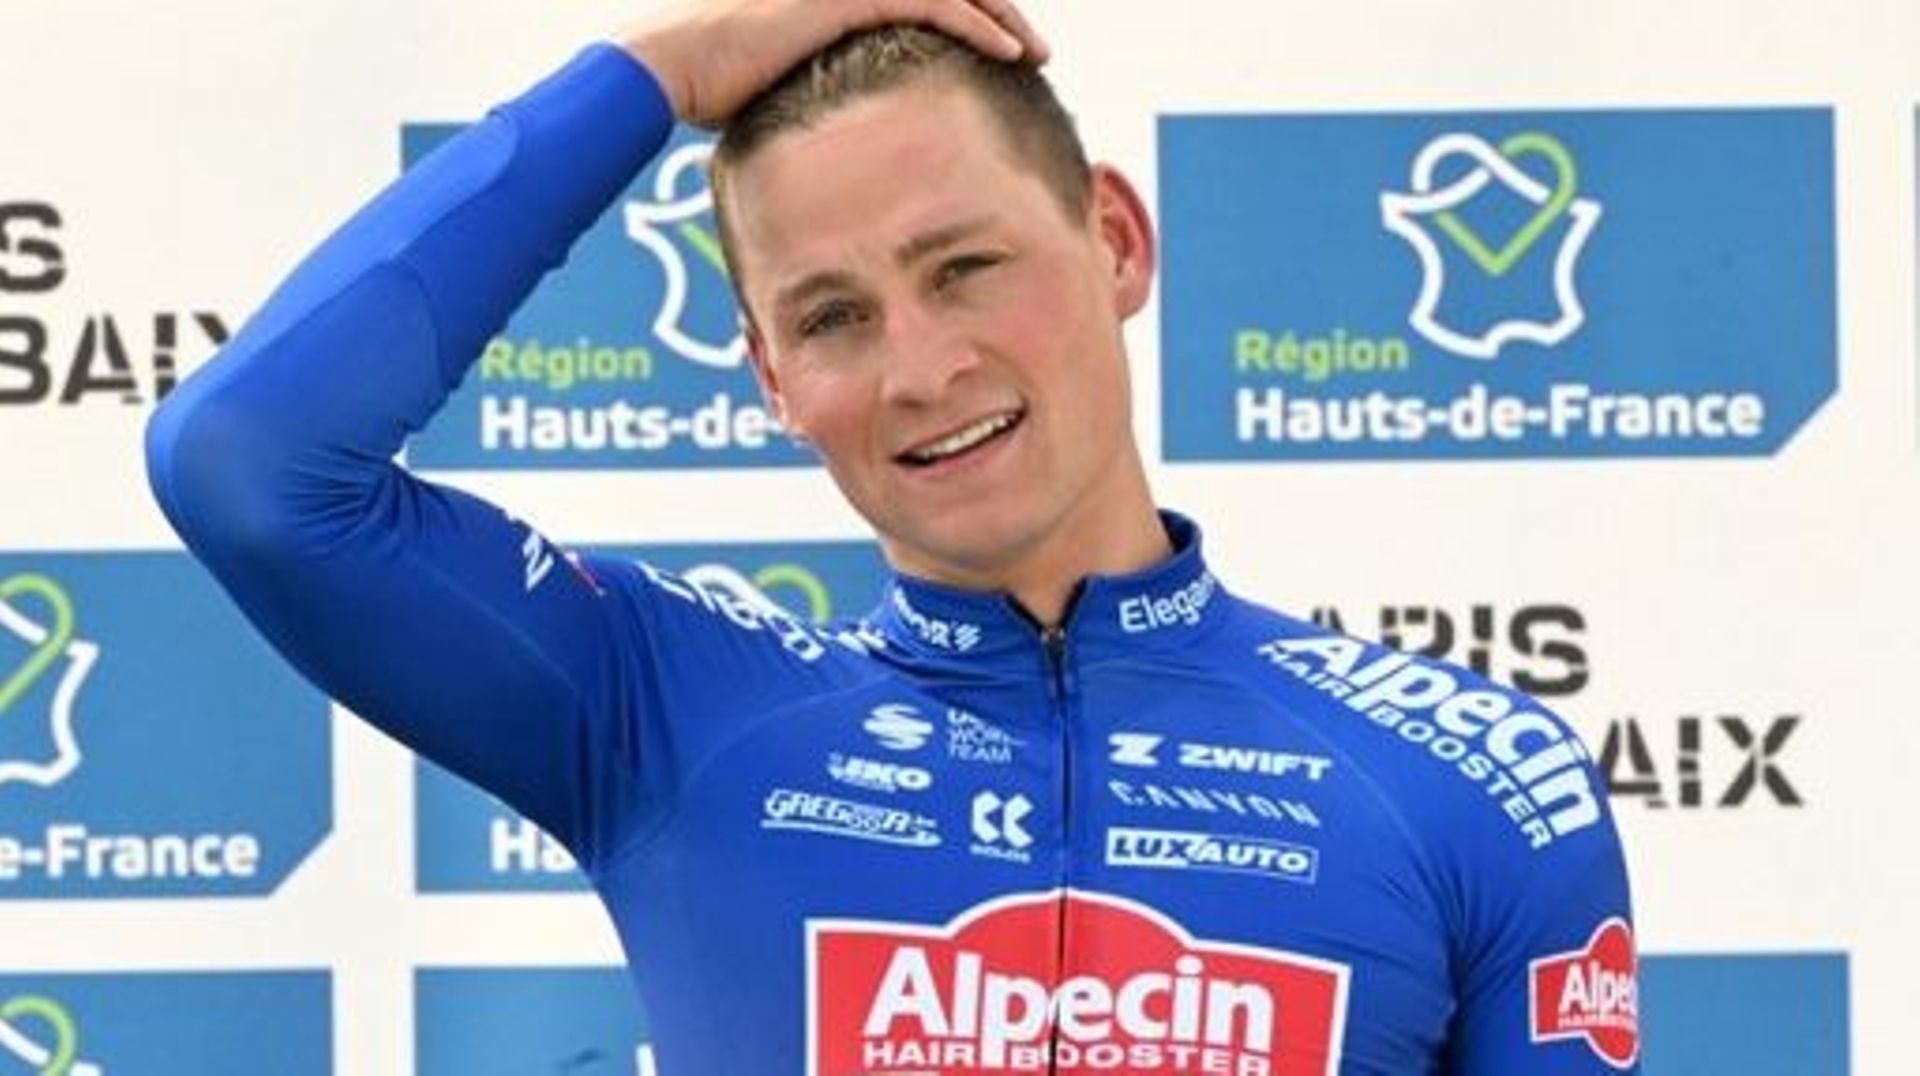 Winner Alpecin-Deceuninck team’s Dutch rider Mathieu Van Der Poel reacts as he celebrates on the podium after winning the 120th edition of the Paris-Roubaix one-day classic cycling race, between Compiegne and Roubaix, northern France, on April 9, 2023. F